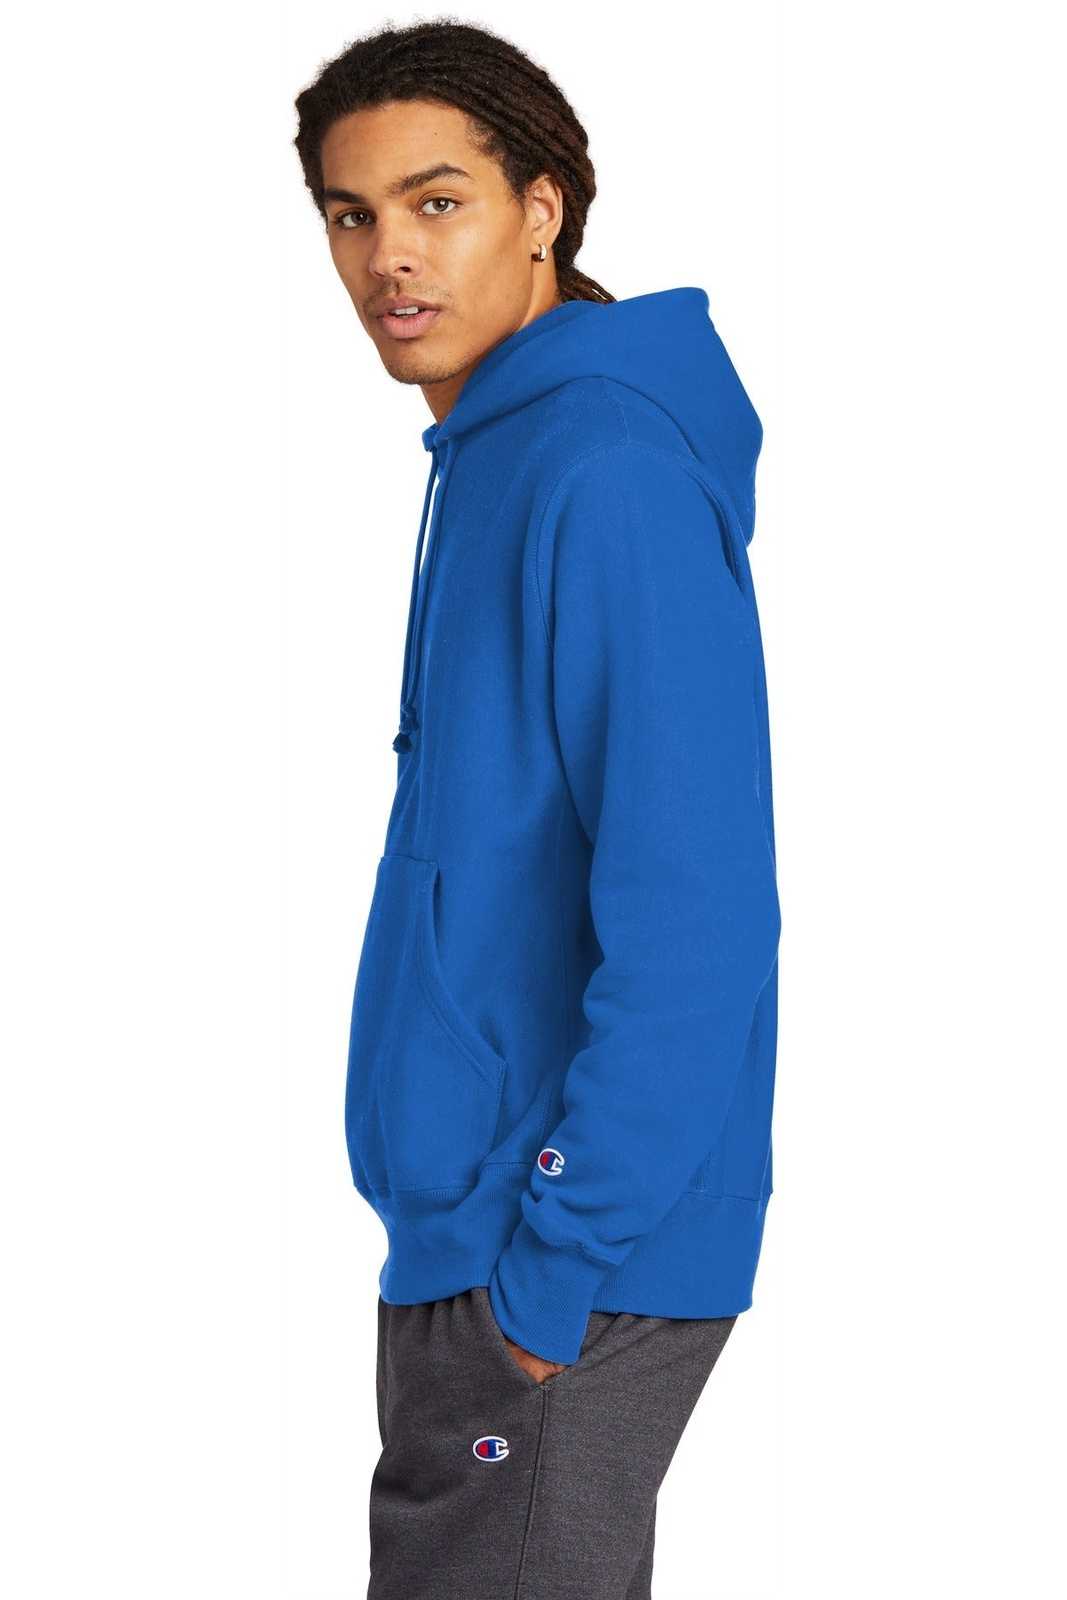 Champion S101 Reverse Weave Hooded Sweatshirt - Athletic Royal - HIT a Double